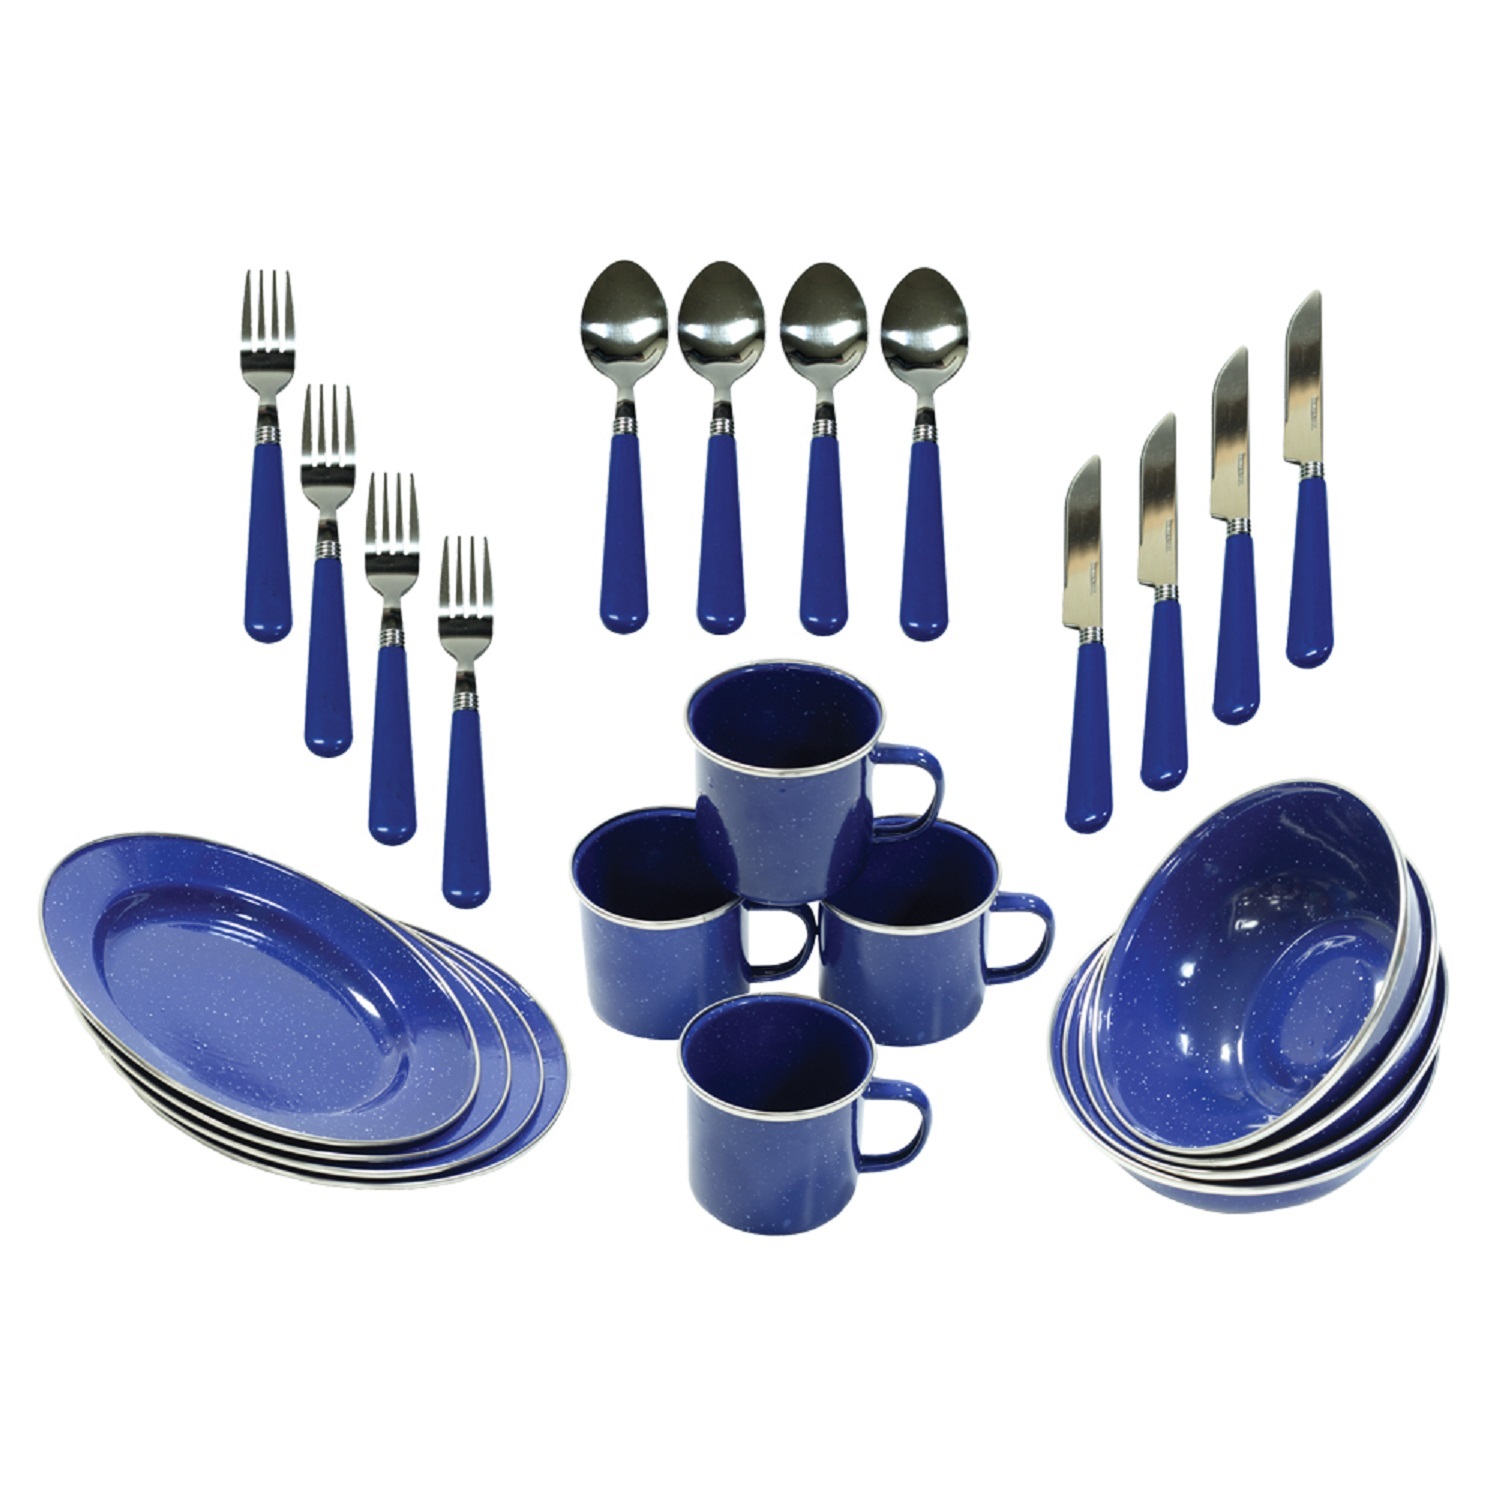 24 Piece Stansport Stainless Steel Enamel Durable Camping Tableware Set Blue